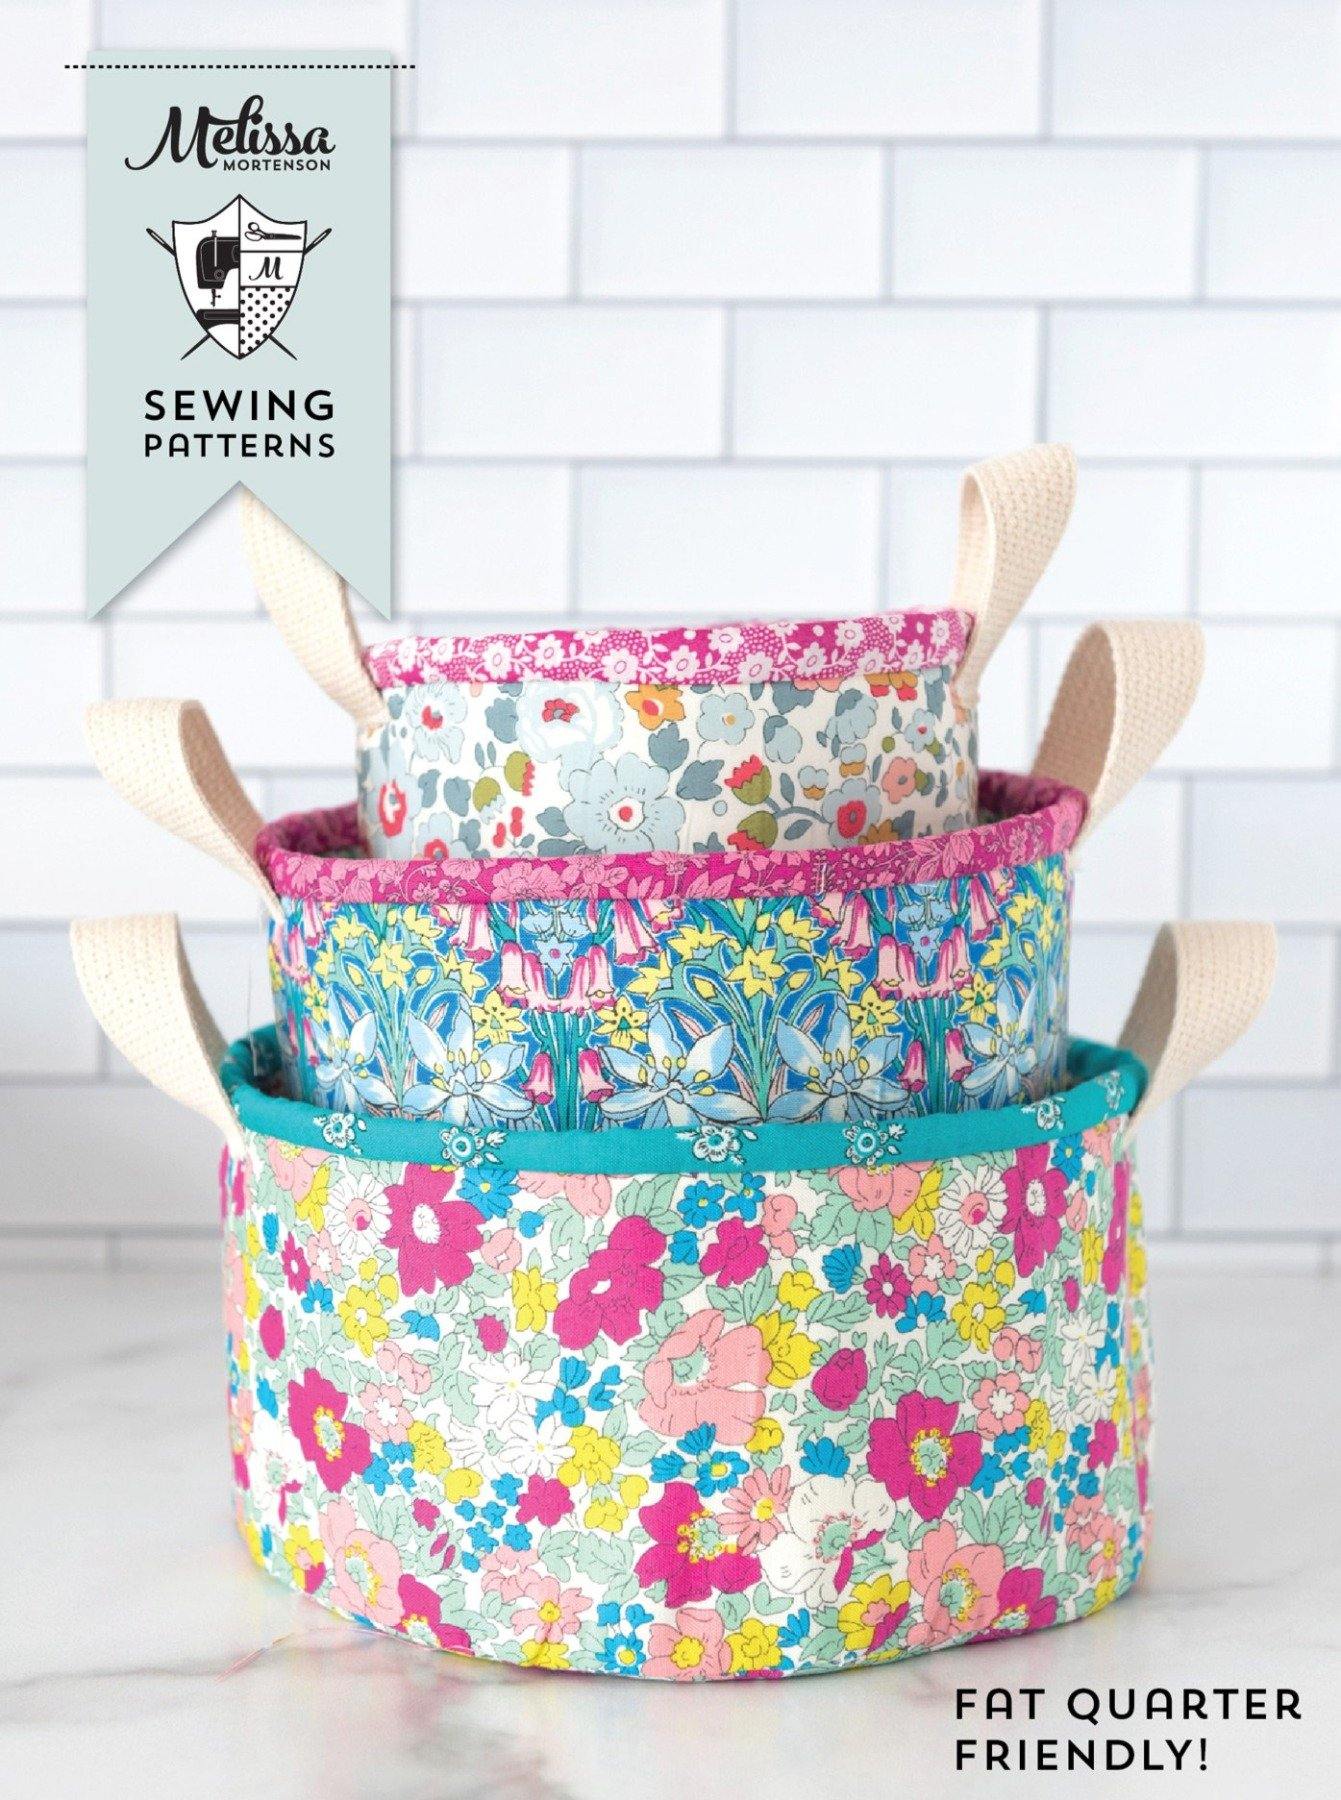 Polka Dot Sewing Boxes for Mothers Day! - Sew Tessuti Blog